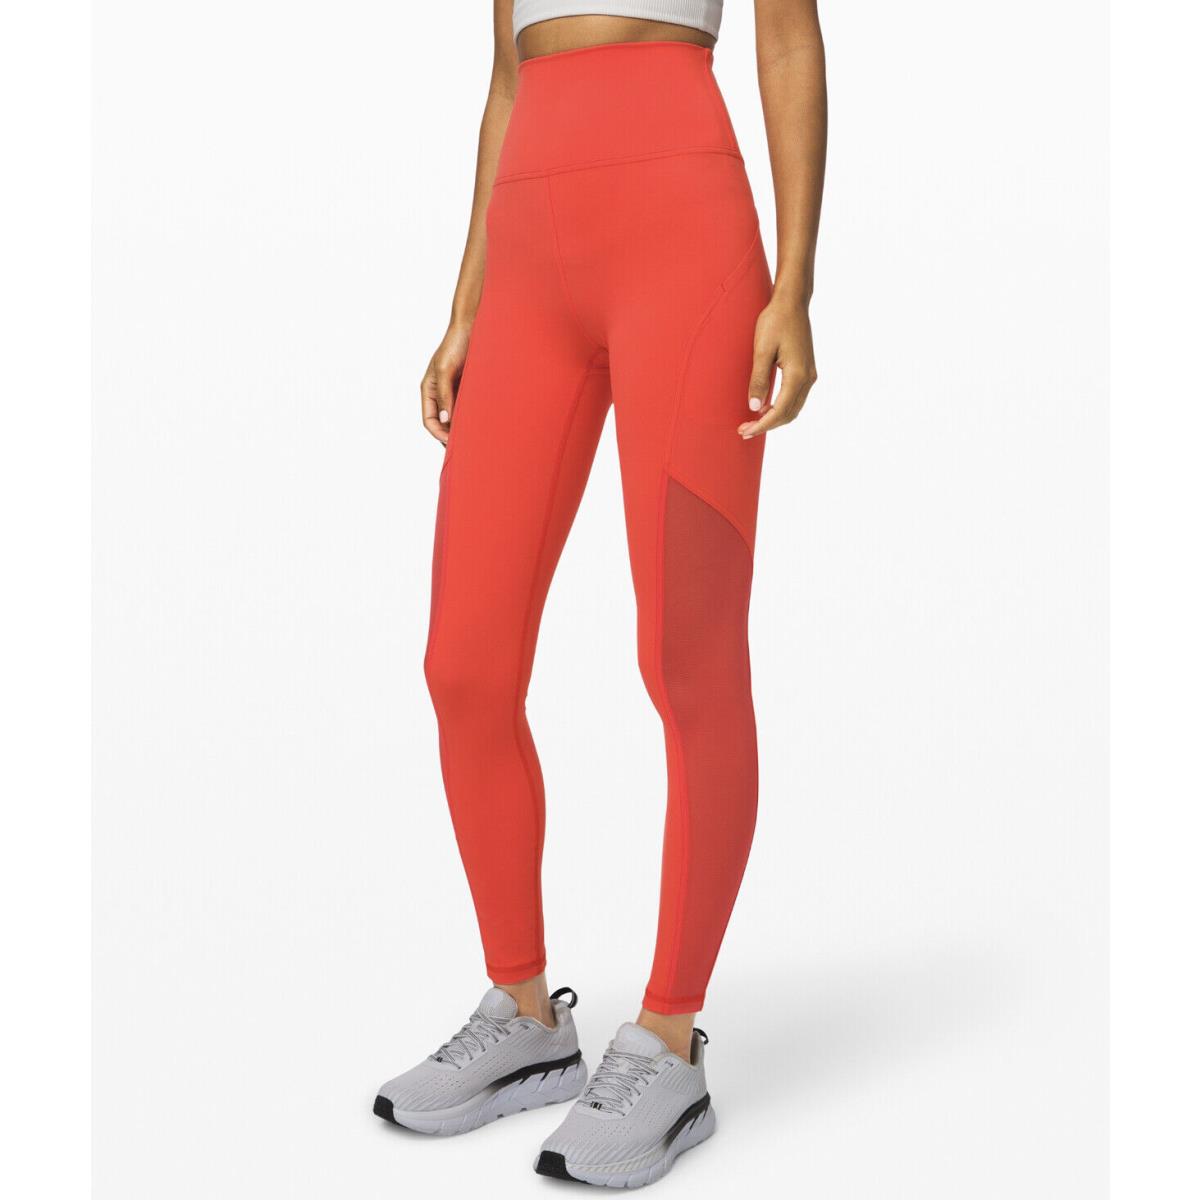 Lululemon Mastered Motion Hight Rise Tight 28 Therma Red Everlux Fabric